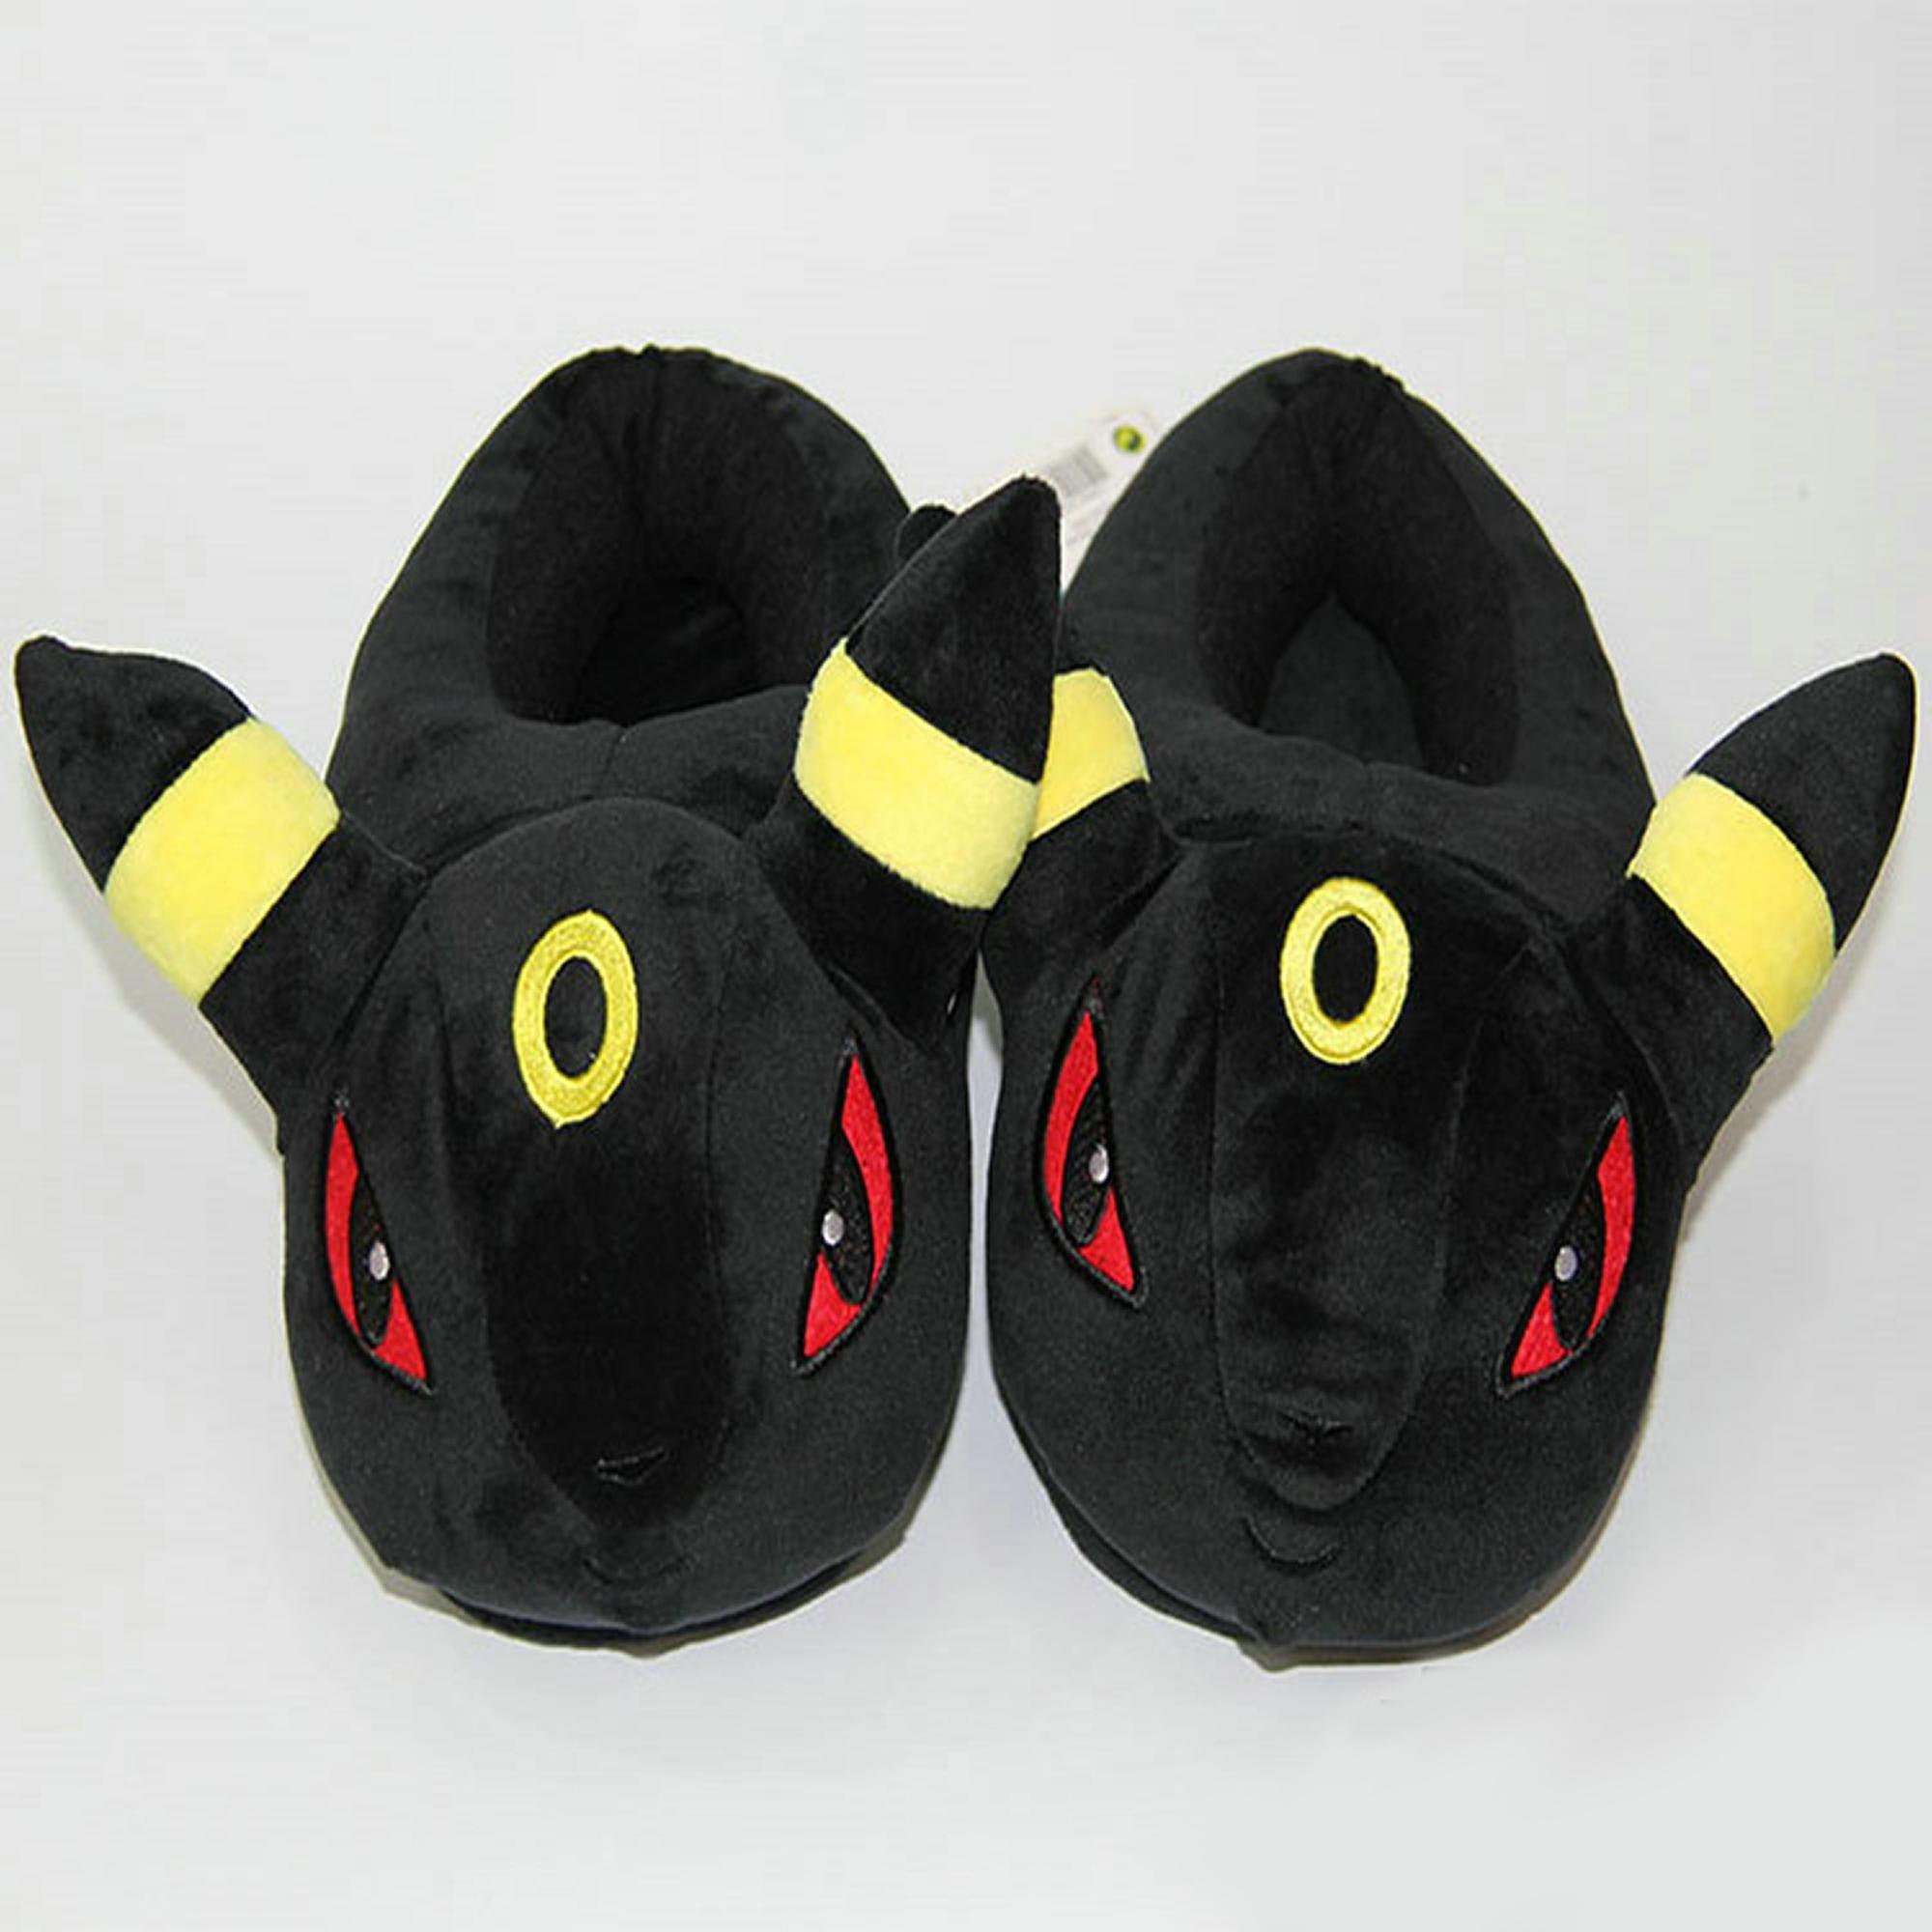 FASLMH Classic toys Moon Eevee Cartoon Anime Plush Slippers Indoor Floor  Shoes, Full Foot Cover Warm Slippers for Unisex, Black 